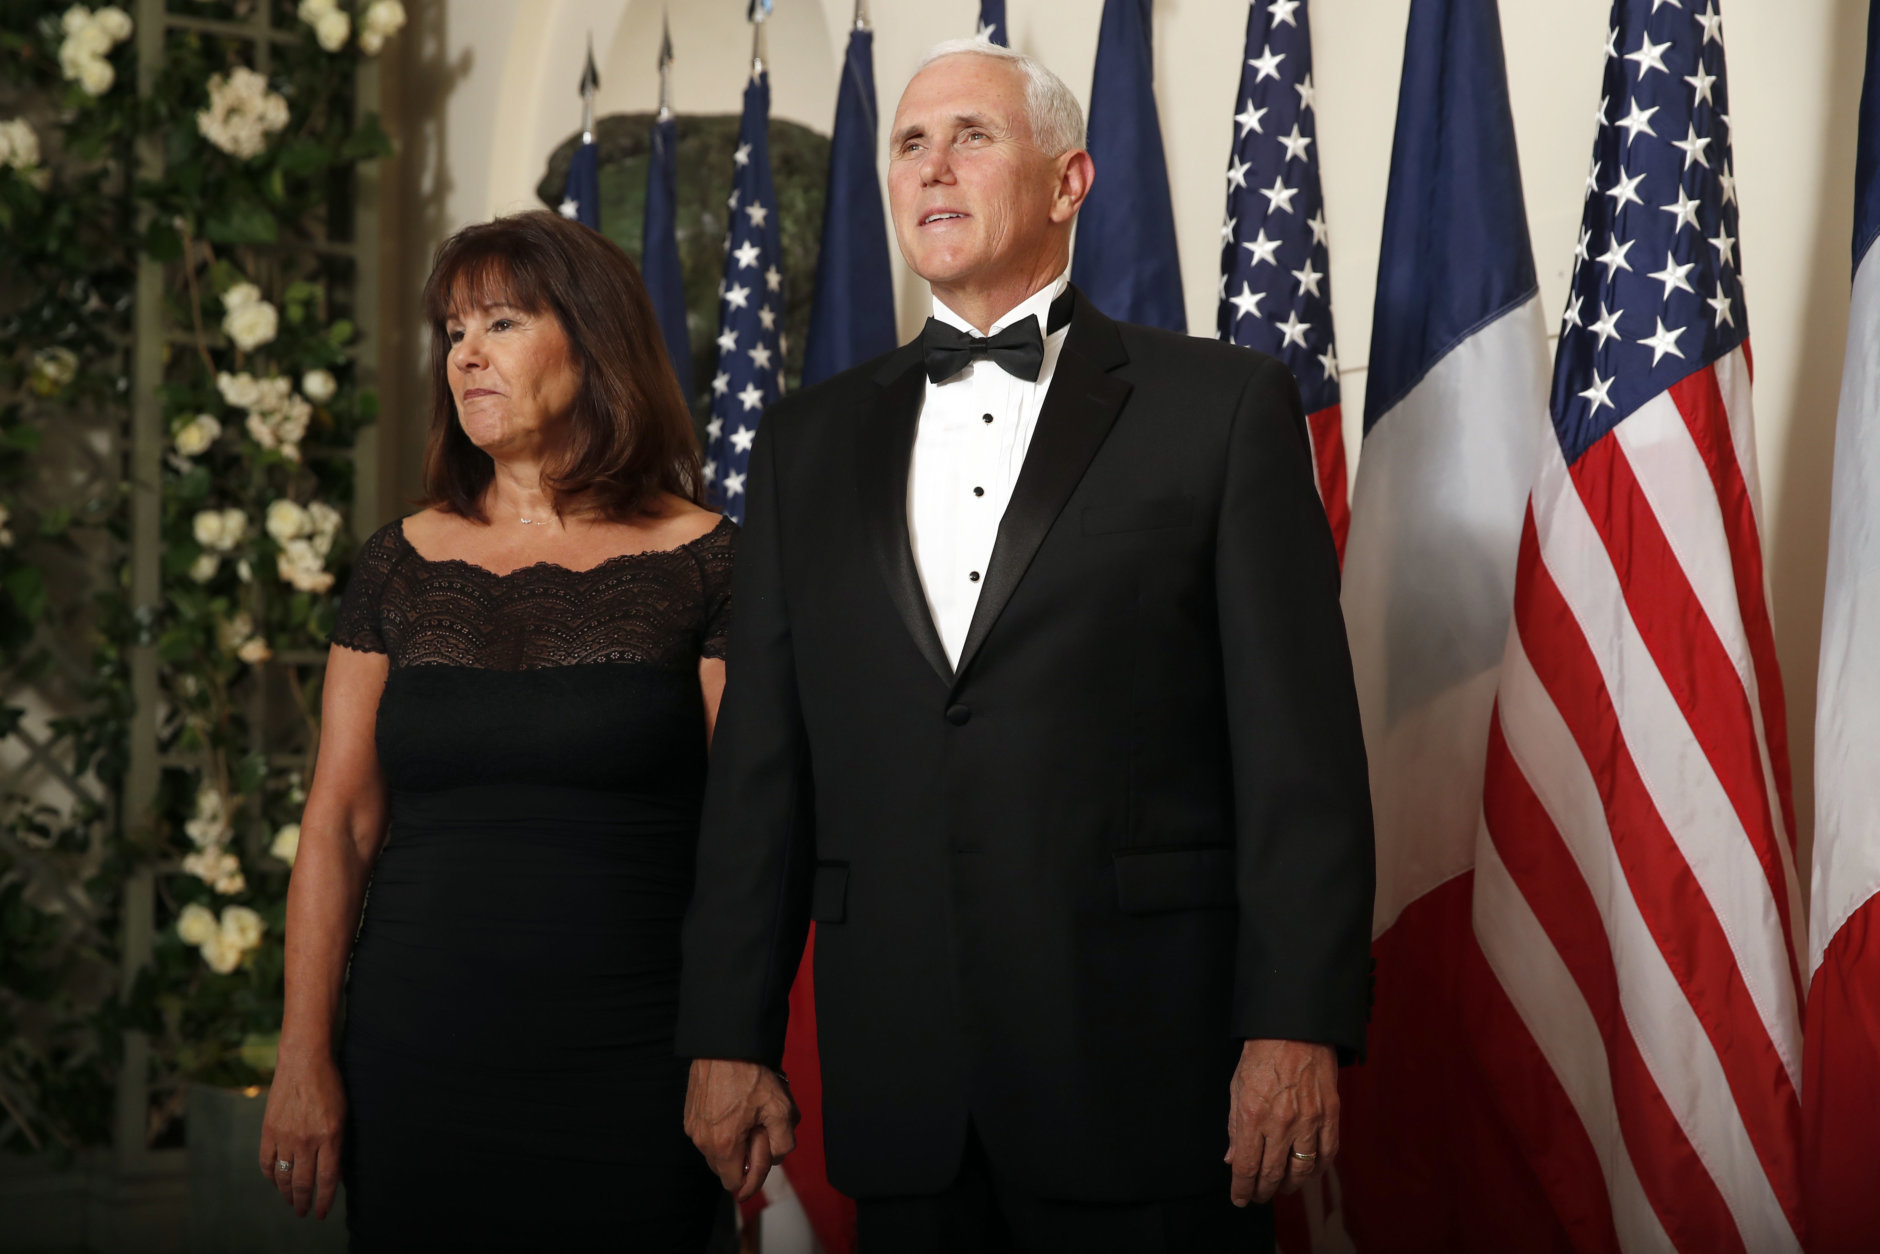 Karen Pence and Vice President Mike Pence arrive for a State Dinner with French President Emmanuel Macron and President Donald Trump at the White House, Tuesday, April 24, 2018, in Washington. (AP Photo/Alex Brandon)